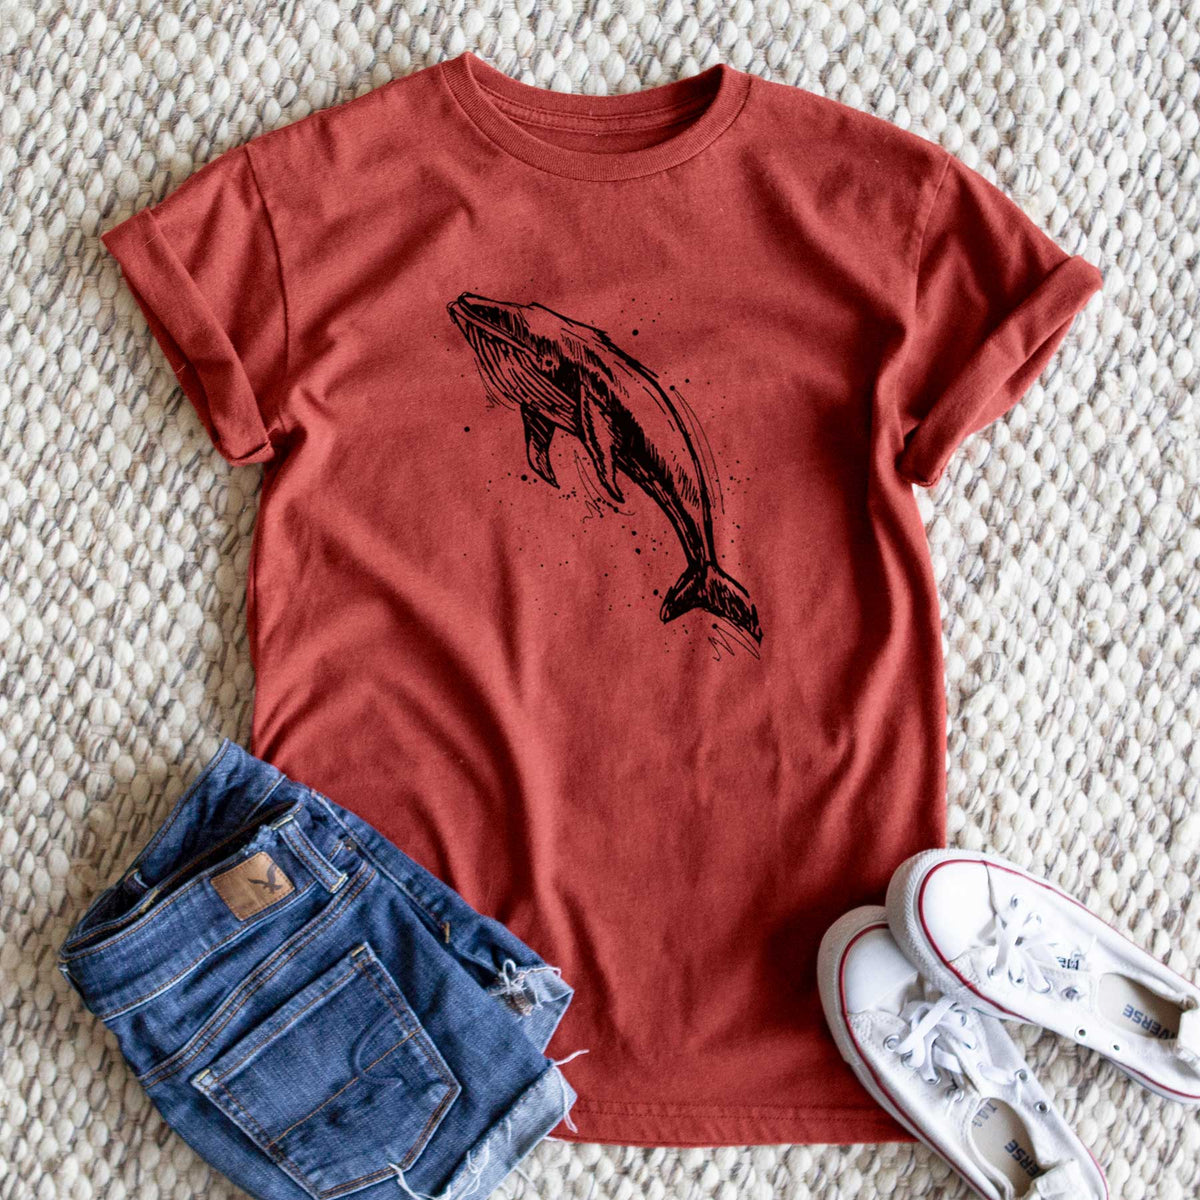 Humpback Whale - Unisex Recycled Eco Tee  - CLOSEOUT - FINAL SALE